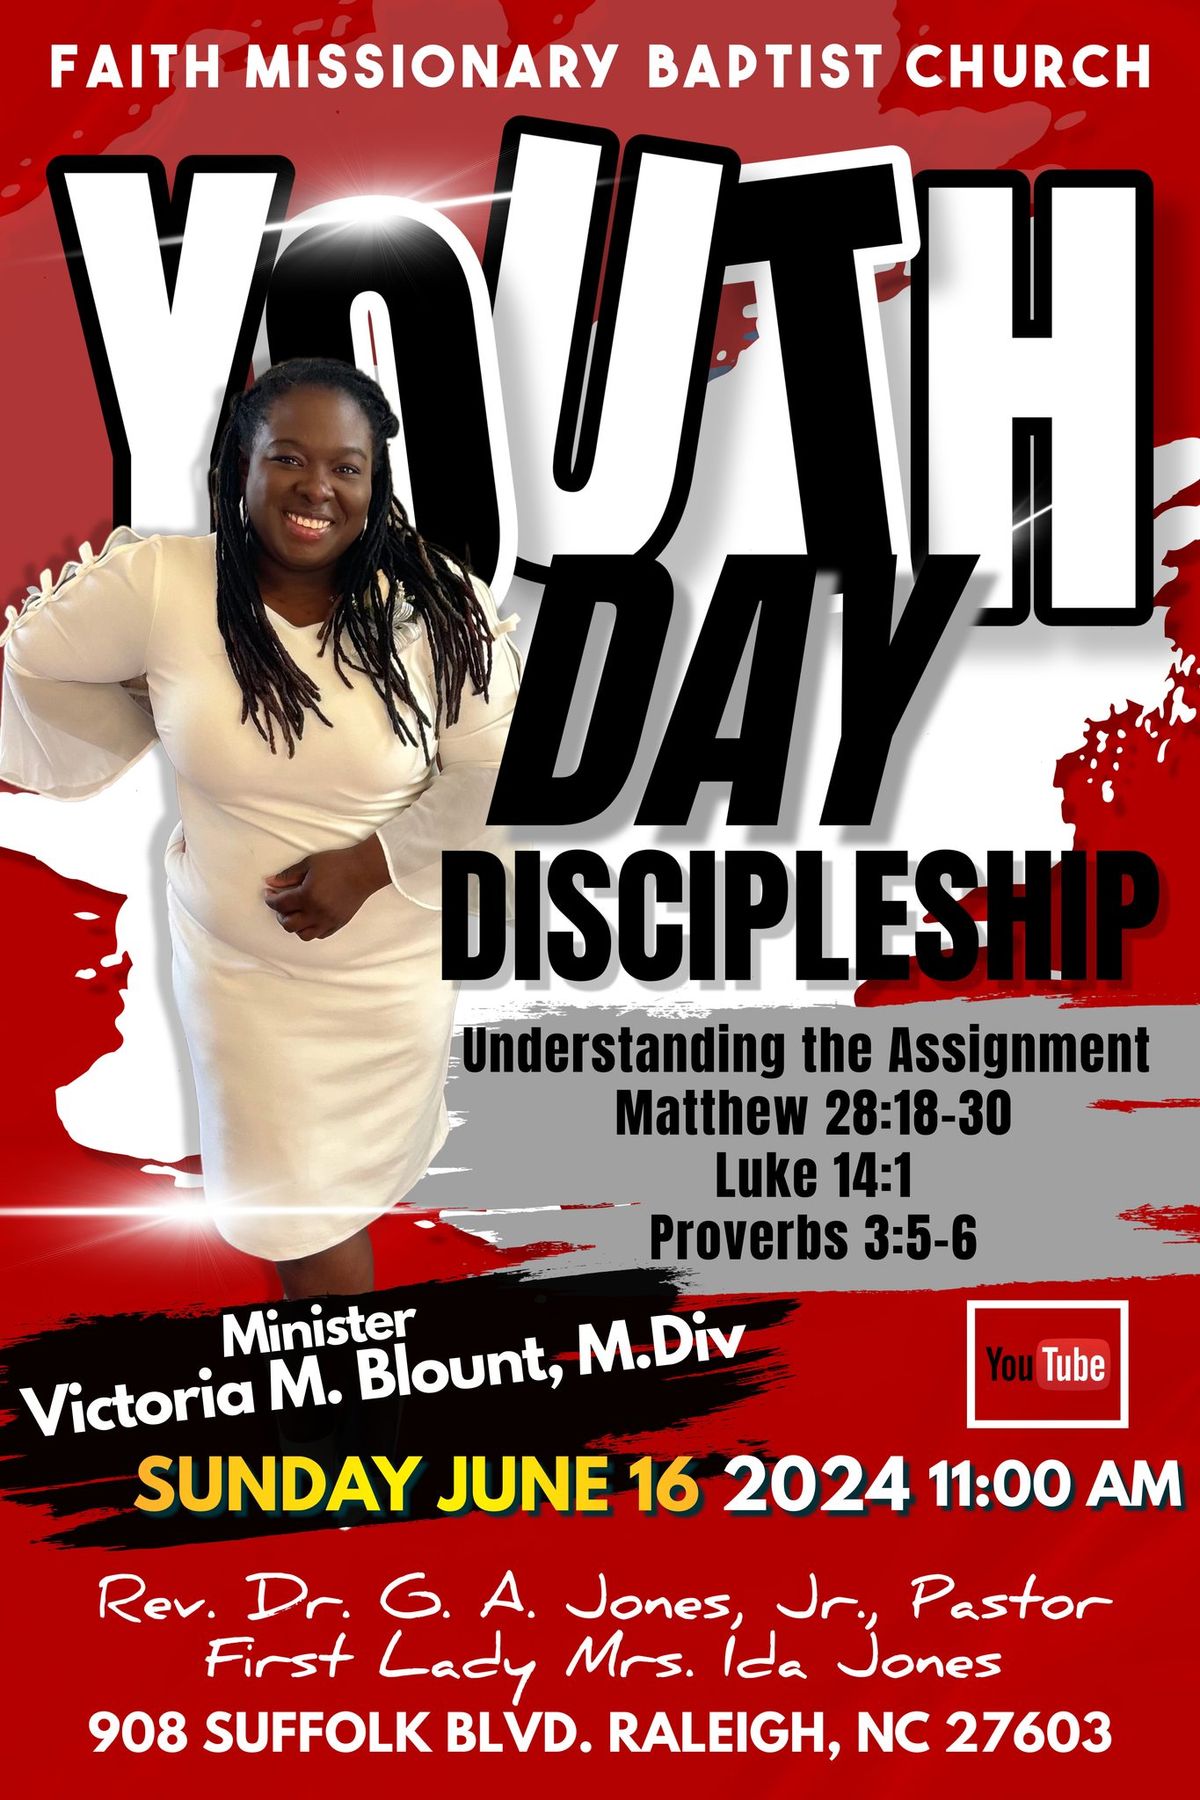 FMBC Annual Youth Day